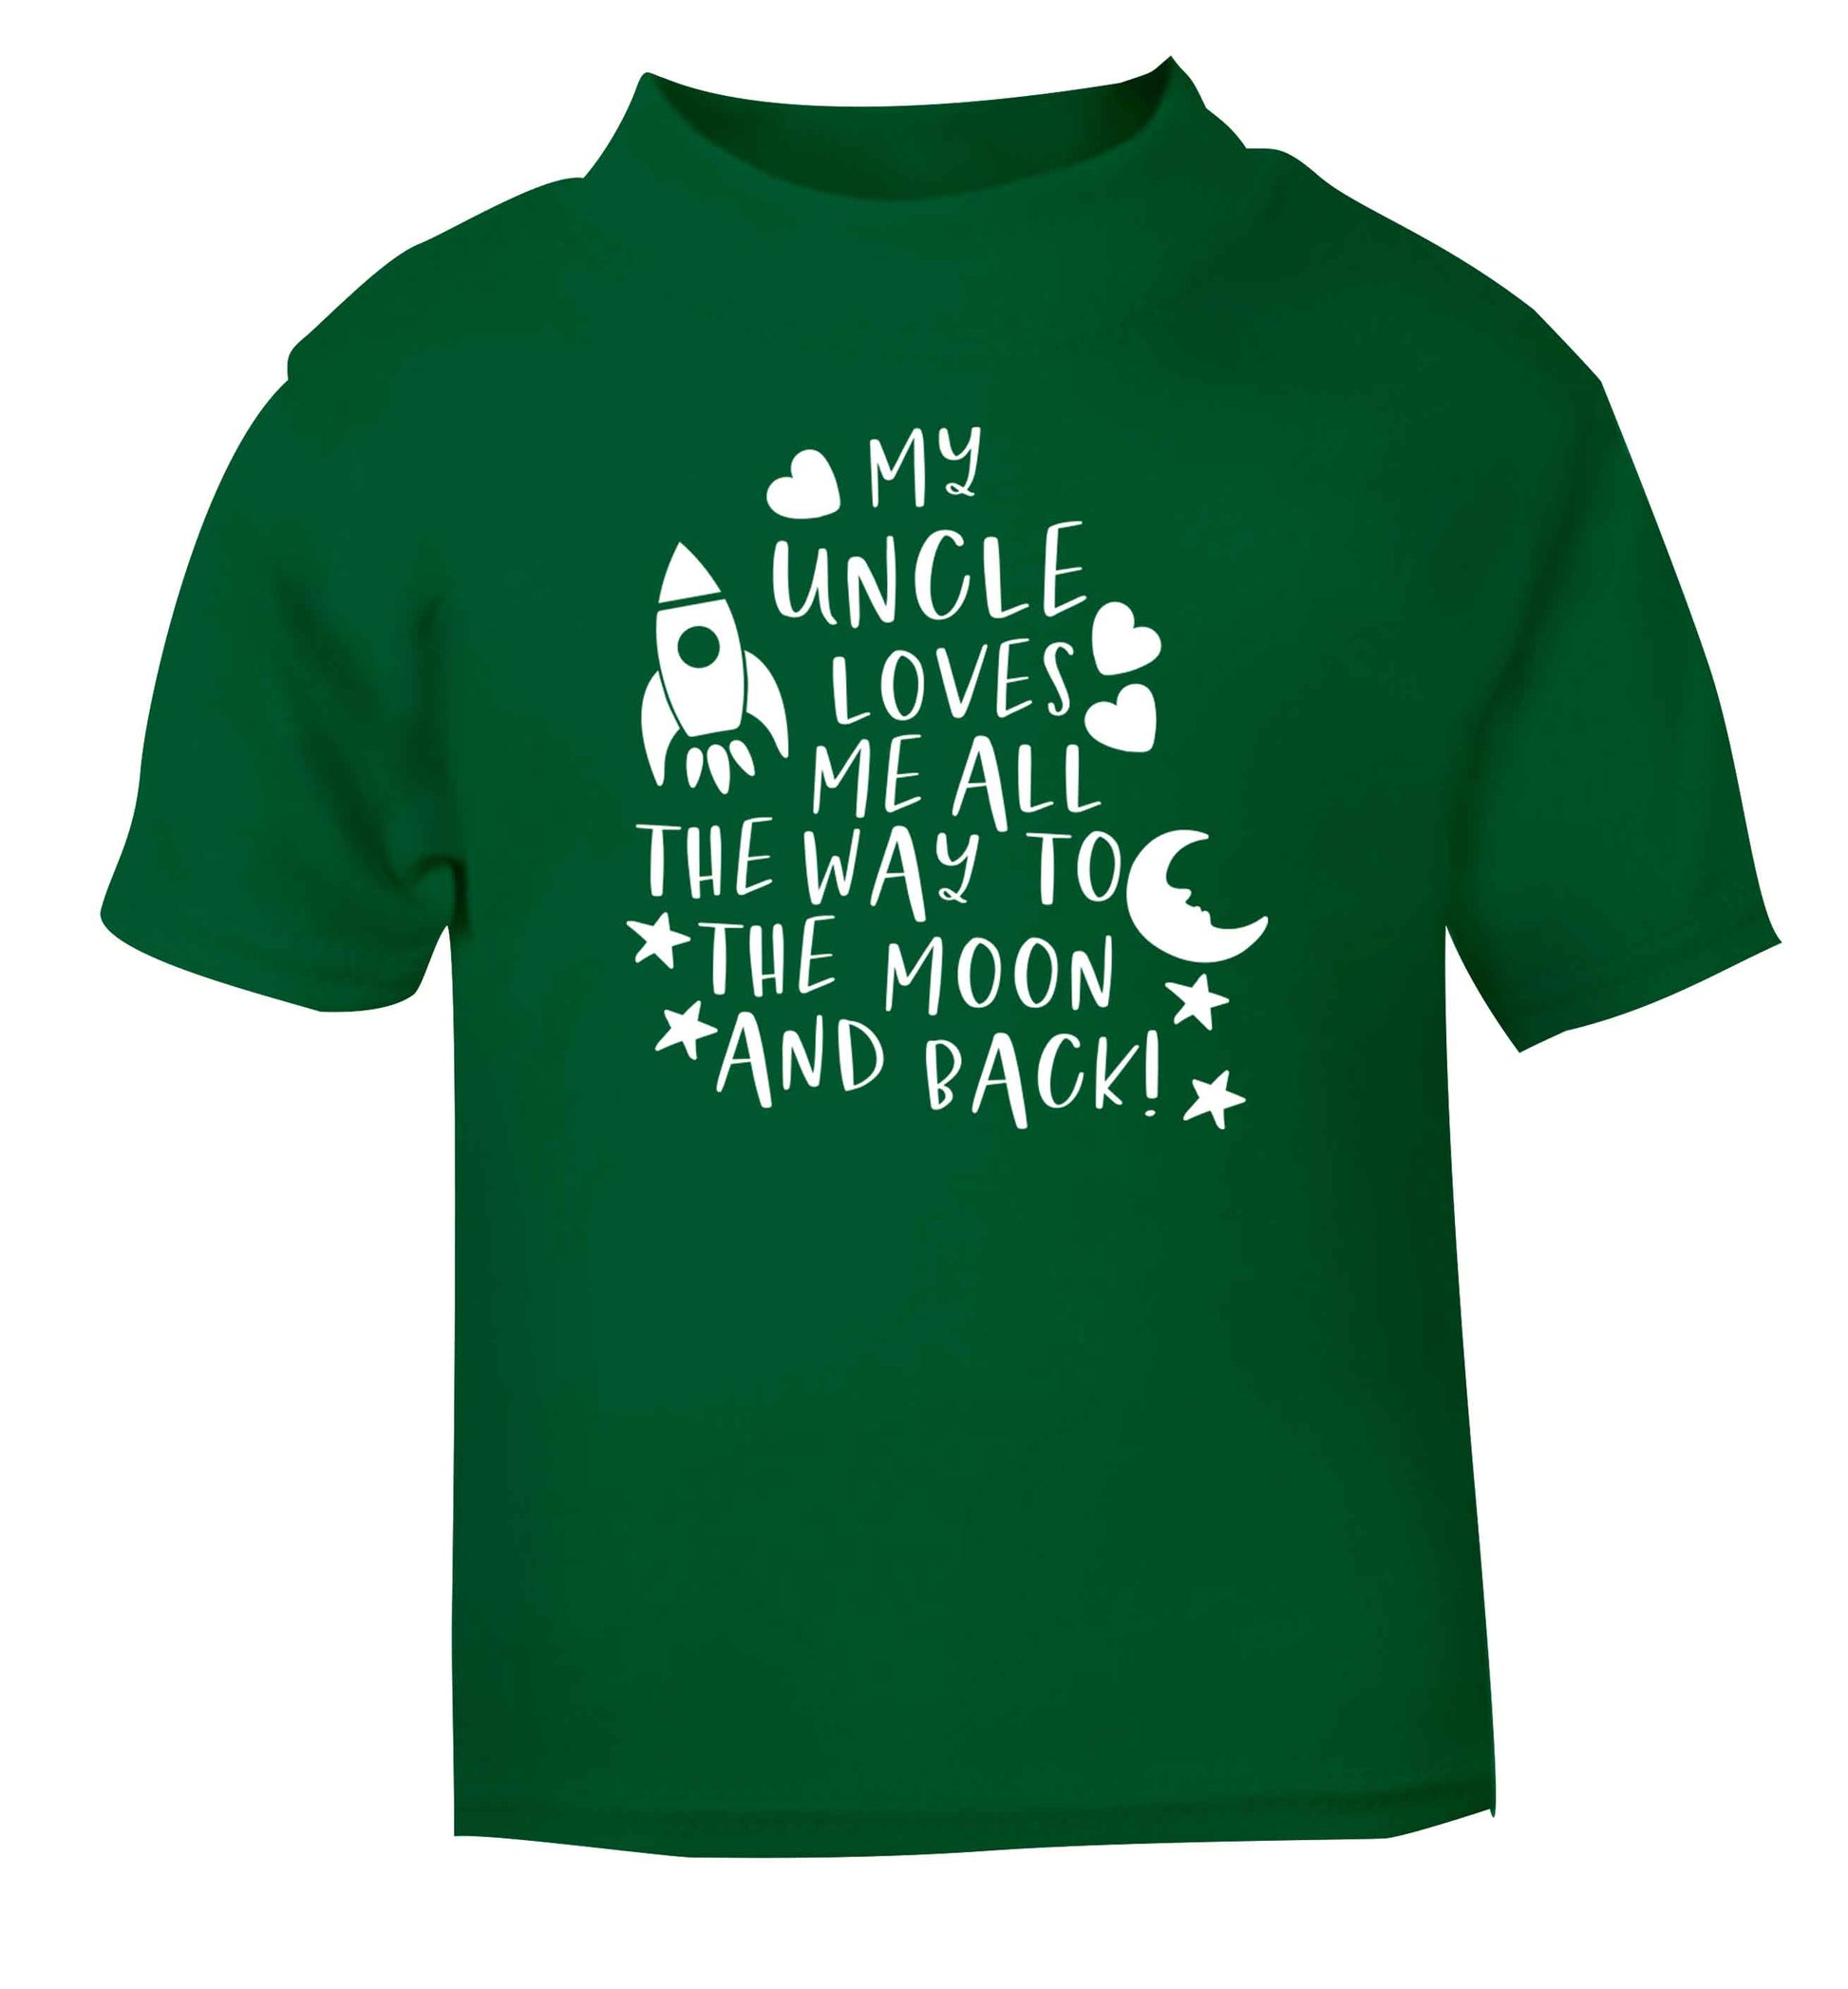 My uncle loves me all the way to the moon and back green Baby Toddler Tshirt 2 Years